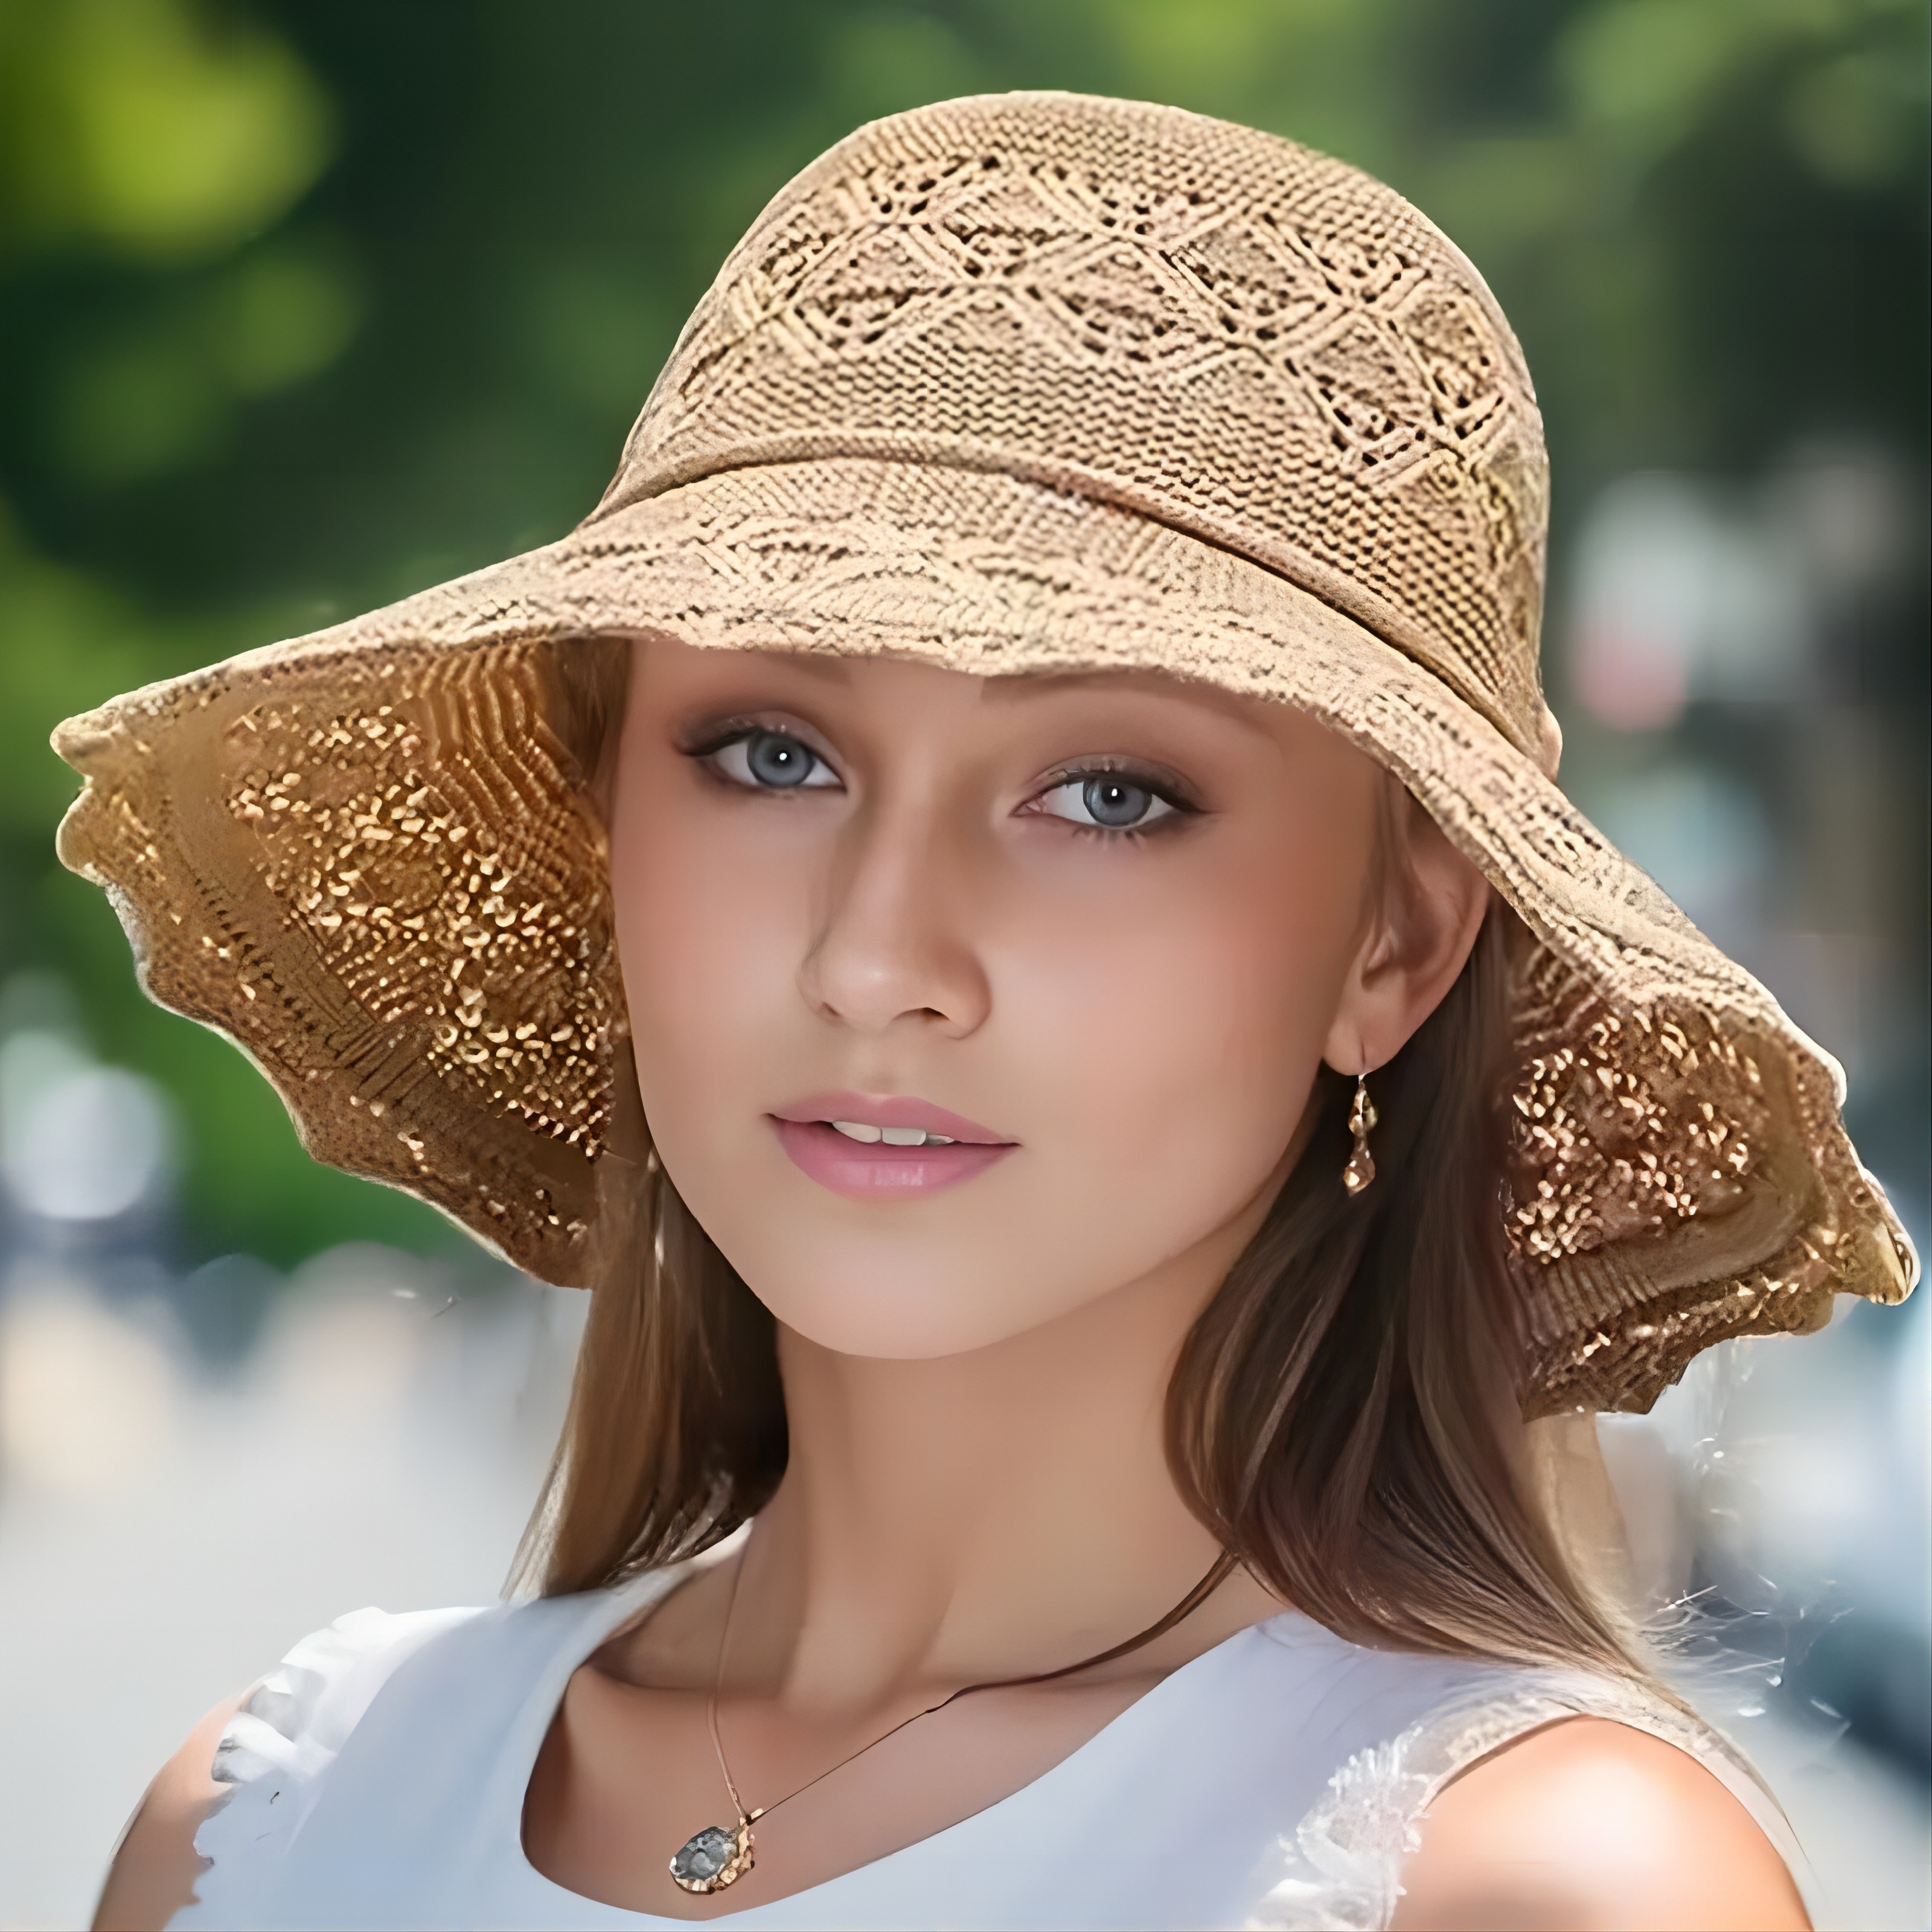 Elegant Knitted Checkered Women's Sun Hat, Fishing Hat - Breathable Durable Foldable Wide Brim Beach Hat, Fashionable Summer Women's Cool Hat with